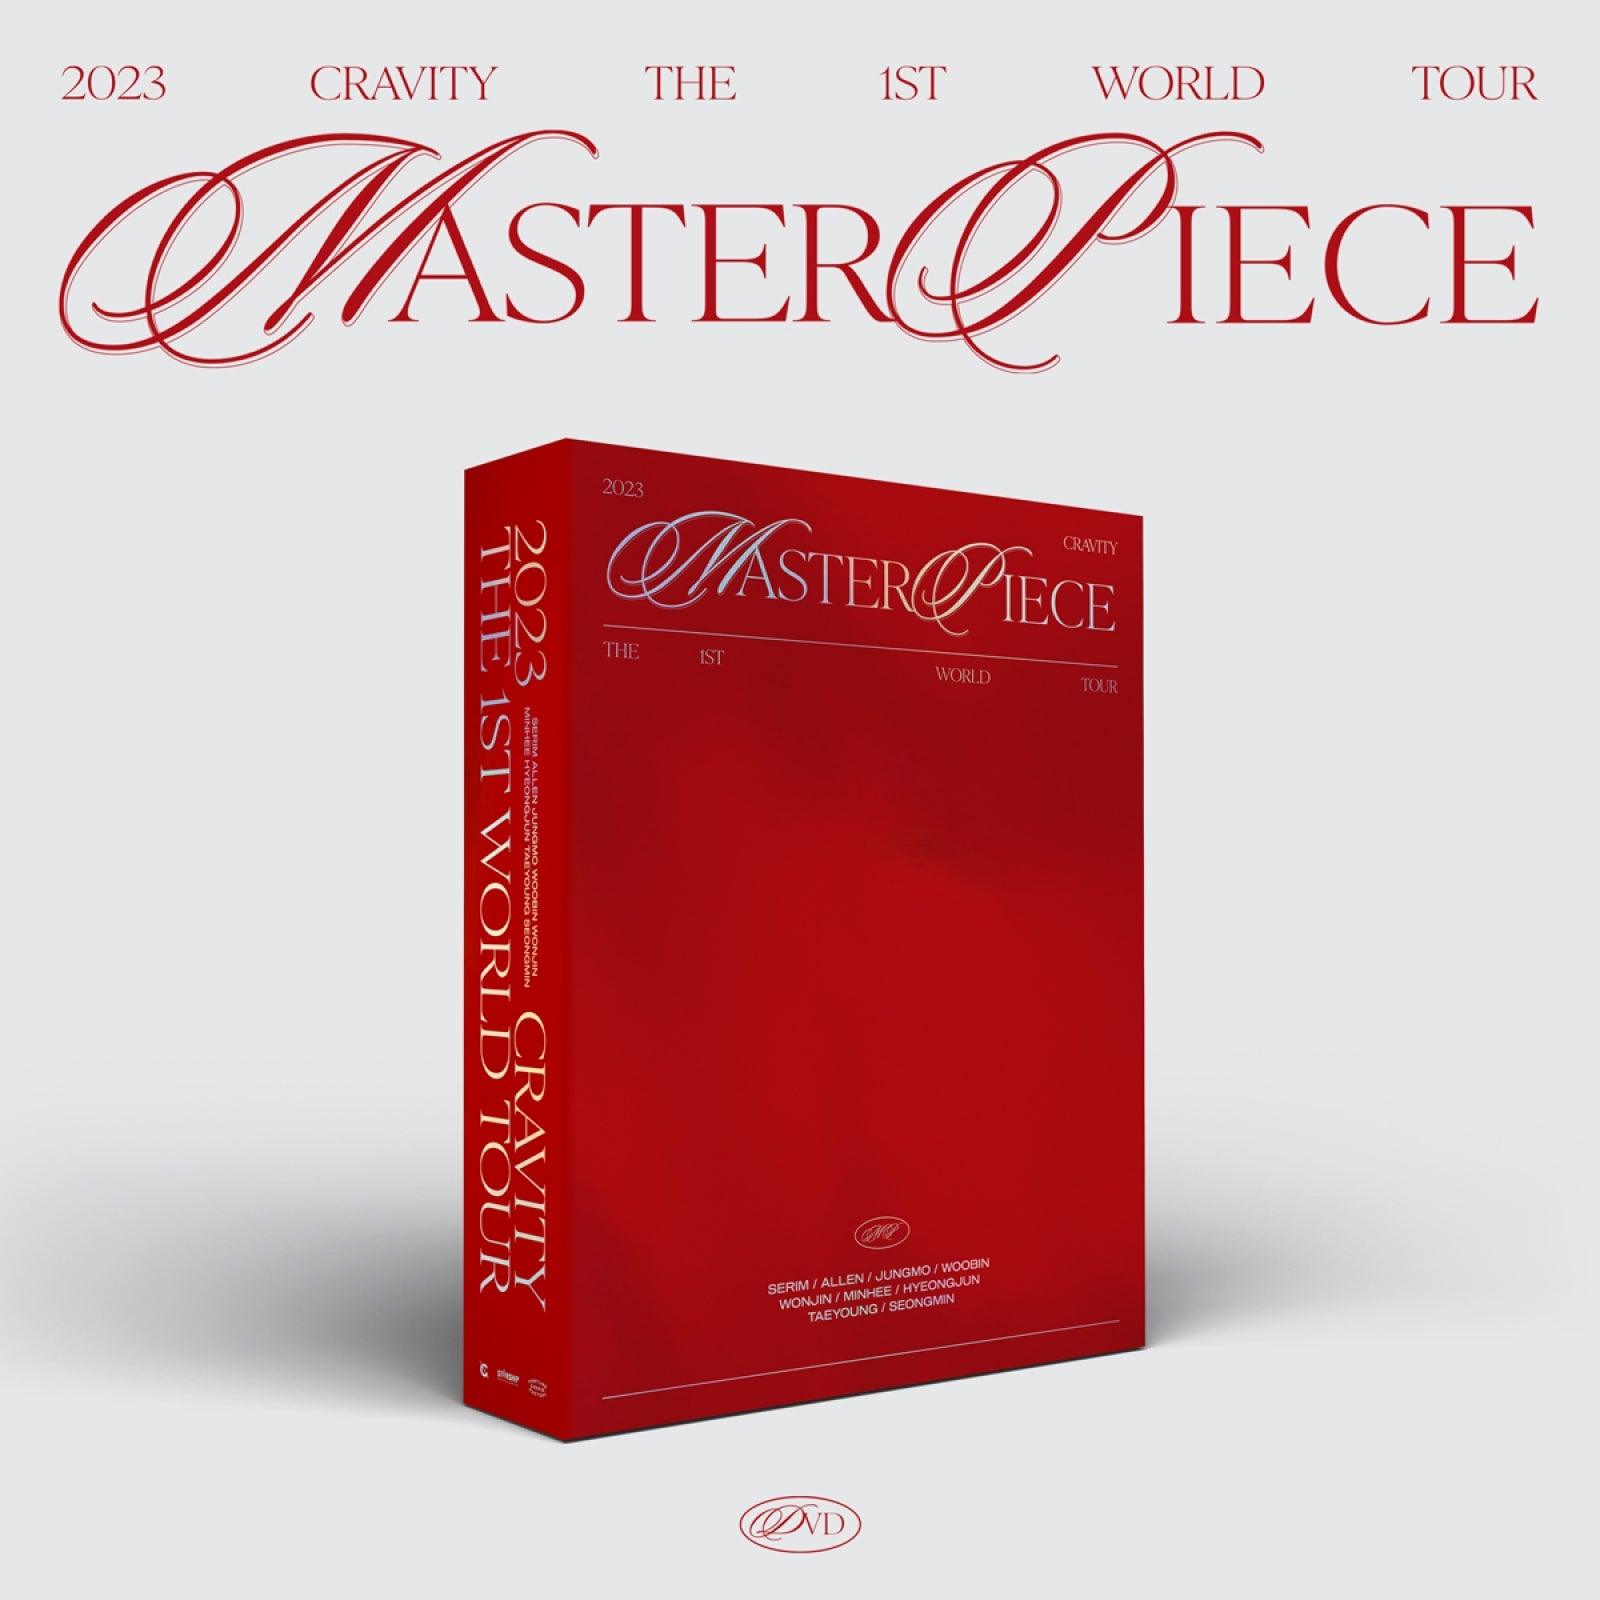 CRAVITY - 2023 CRAVITY THE 1ST WORLD TOUR [MASTERPIECE] (DVD, KiT VIDEO) - Shopping Around the World with Goodsnjoy